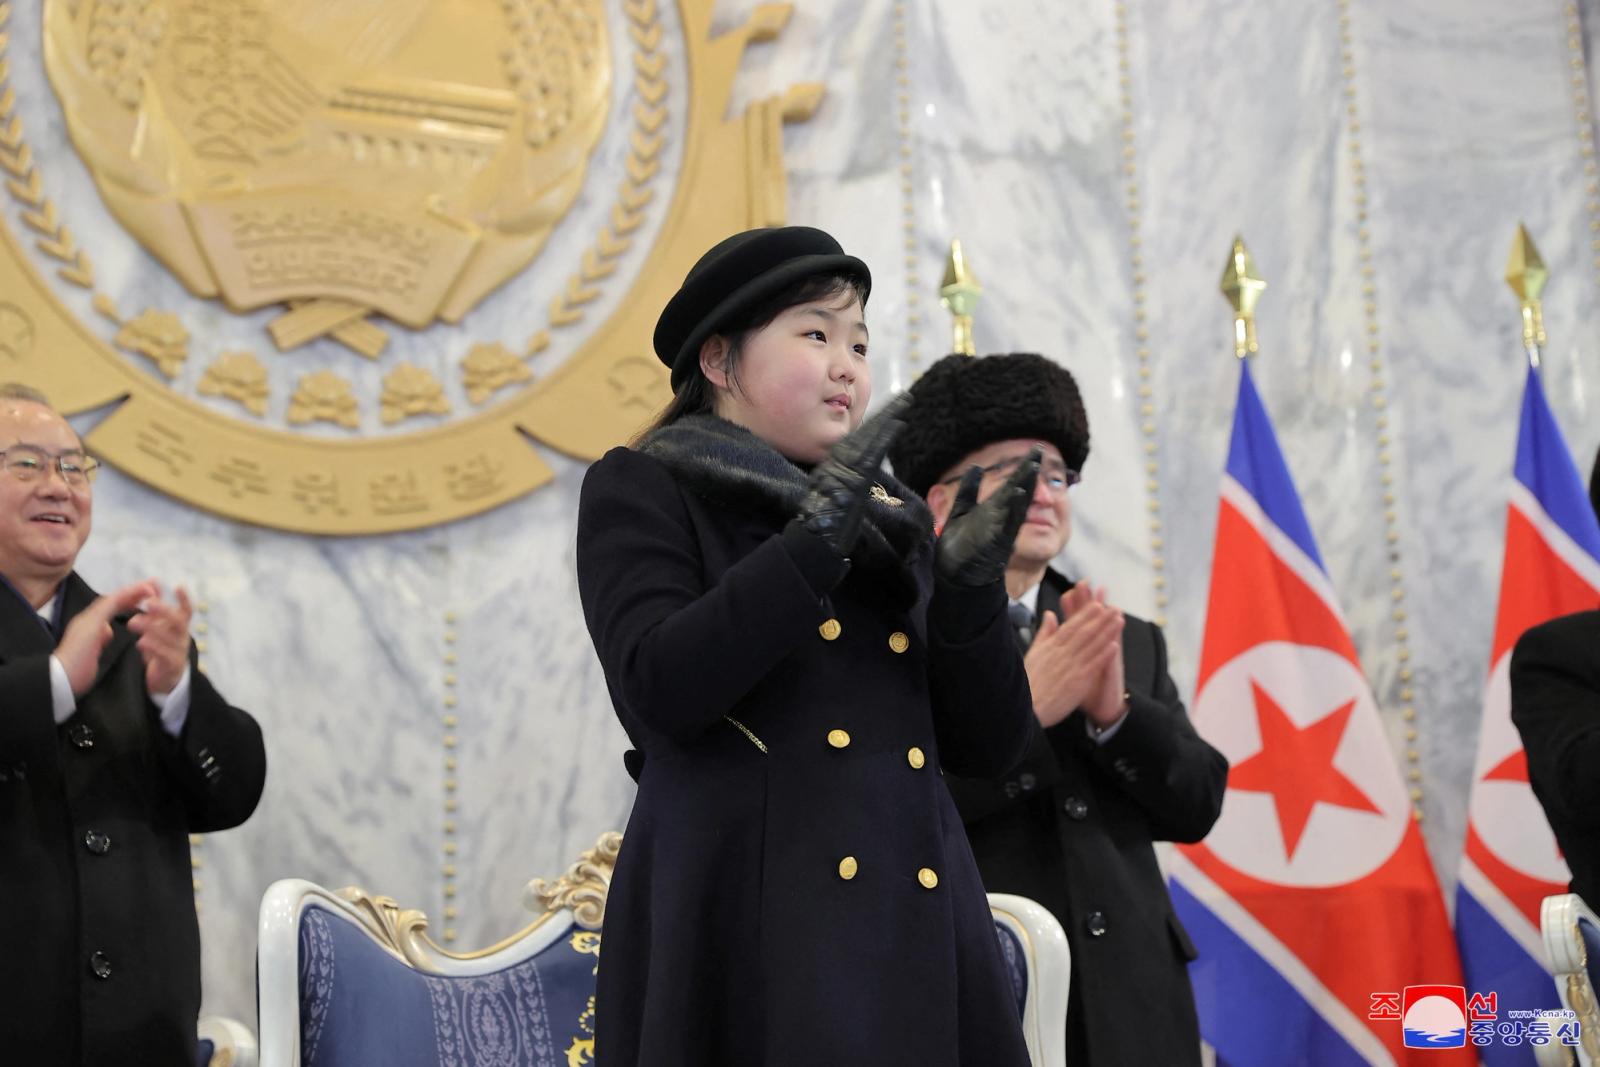 Kim Ju Ae, daughter of North Korean leader Kim Jong Un, attends a military parade to mark the 75th founding anniversary of North Korea's army, at Kim Il Sung Square in Pyongyang, North Korea February 8, 2023,